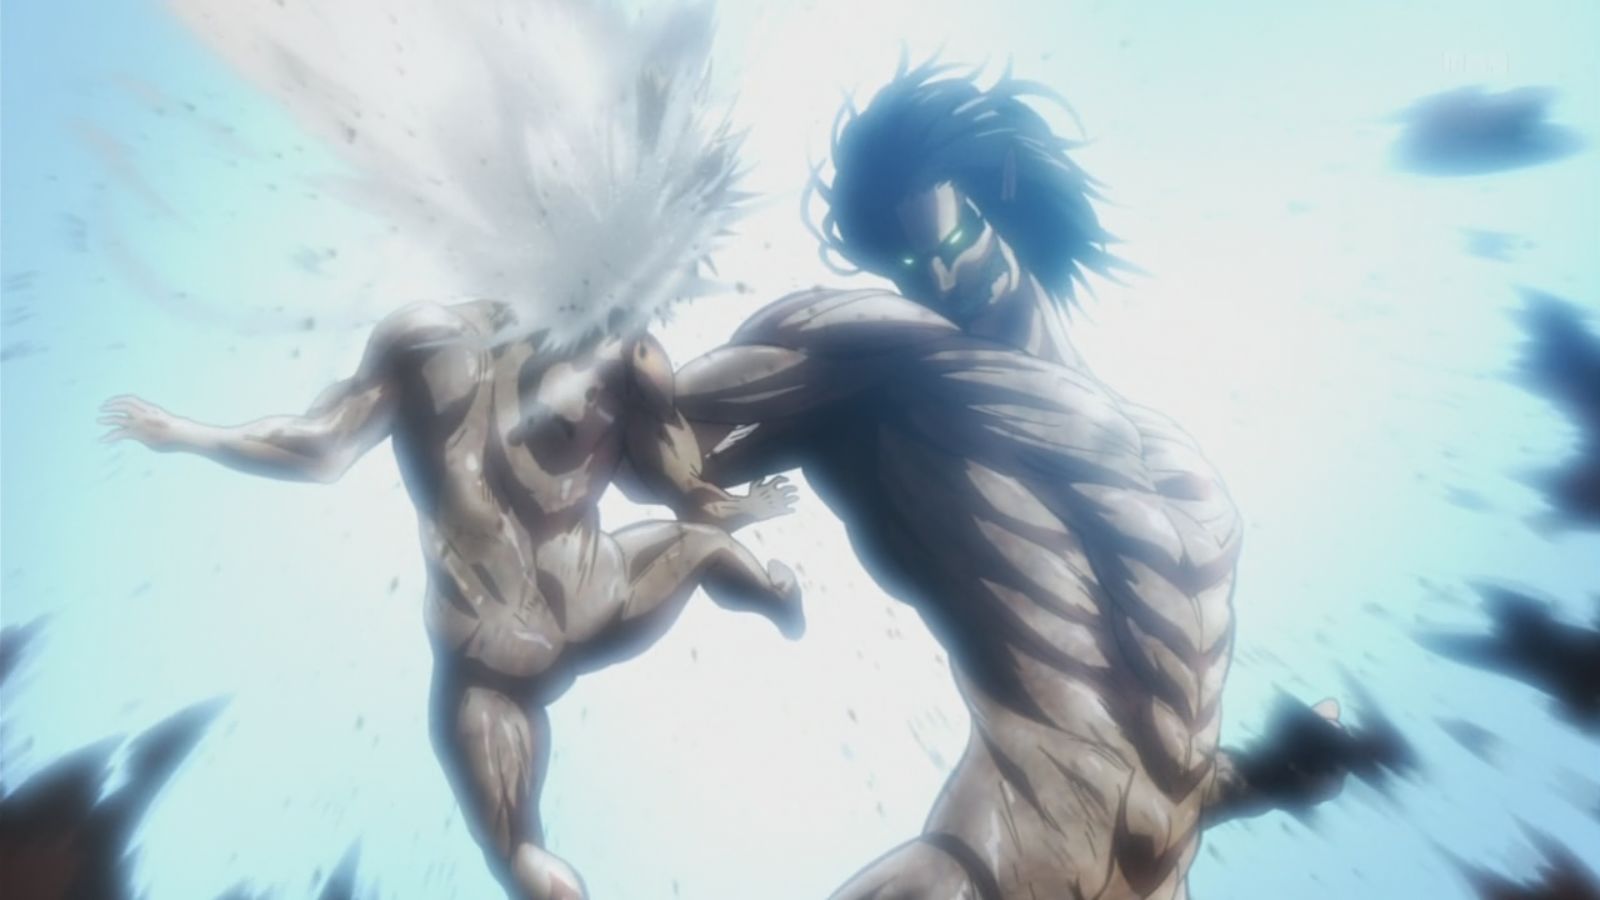 ANIME MONDAY: Attack On Titan - "Where The Left Arm Went - Defense of